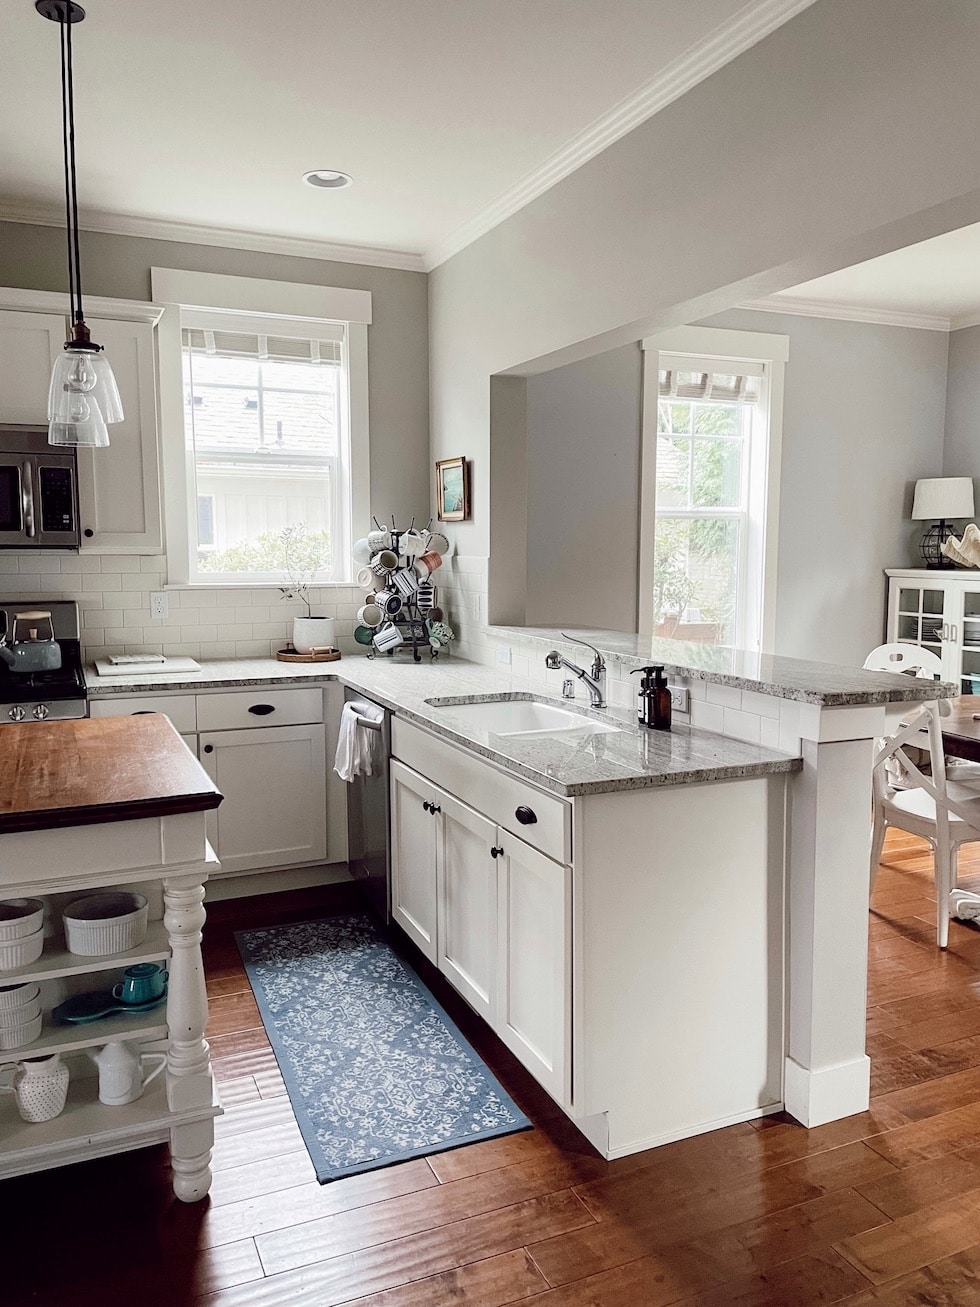 Our Kitchen and Dining Room Remodeling Plans: The Before Photos